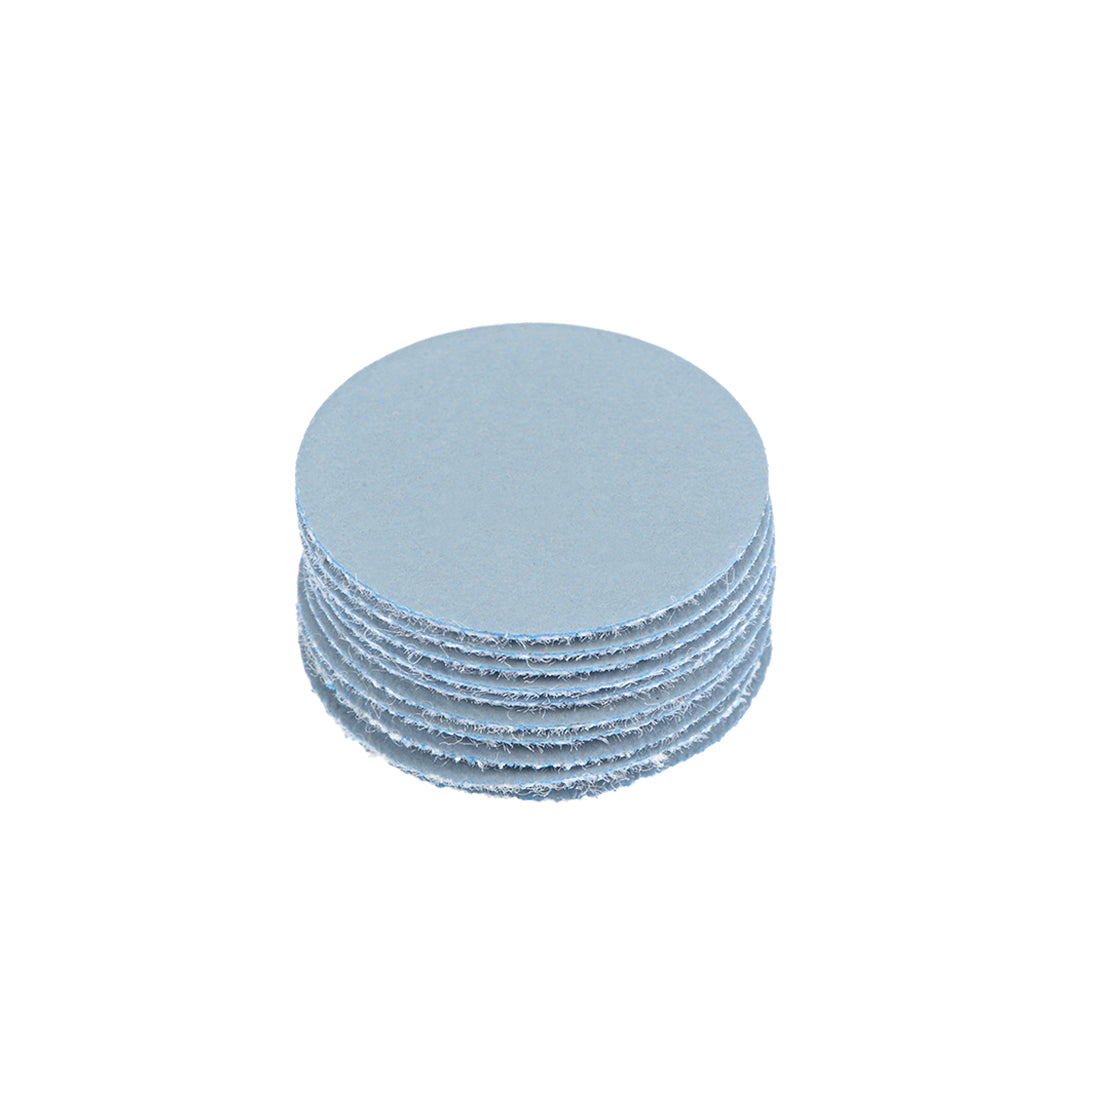 Uxcell Uxcell 1-Inch Hook and Loop Sanding Disc Aluminum Oxide Silicon Carbide 5000 Grit 10pcs